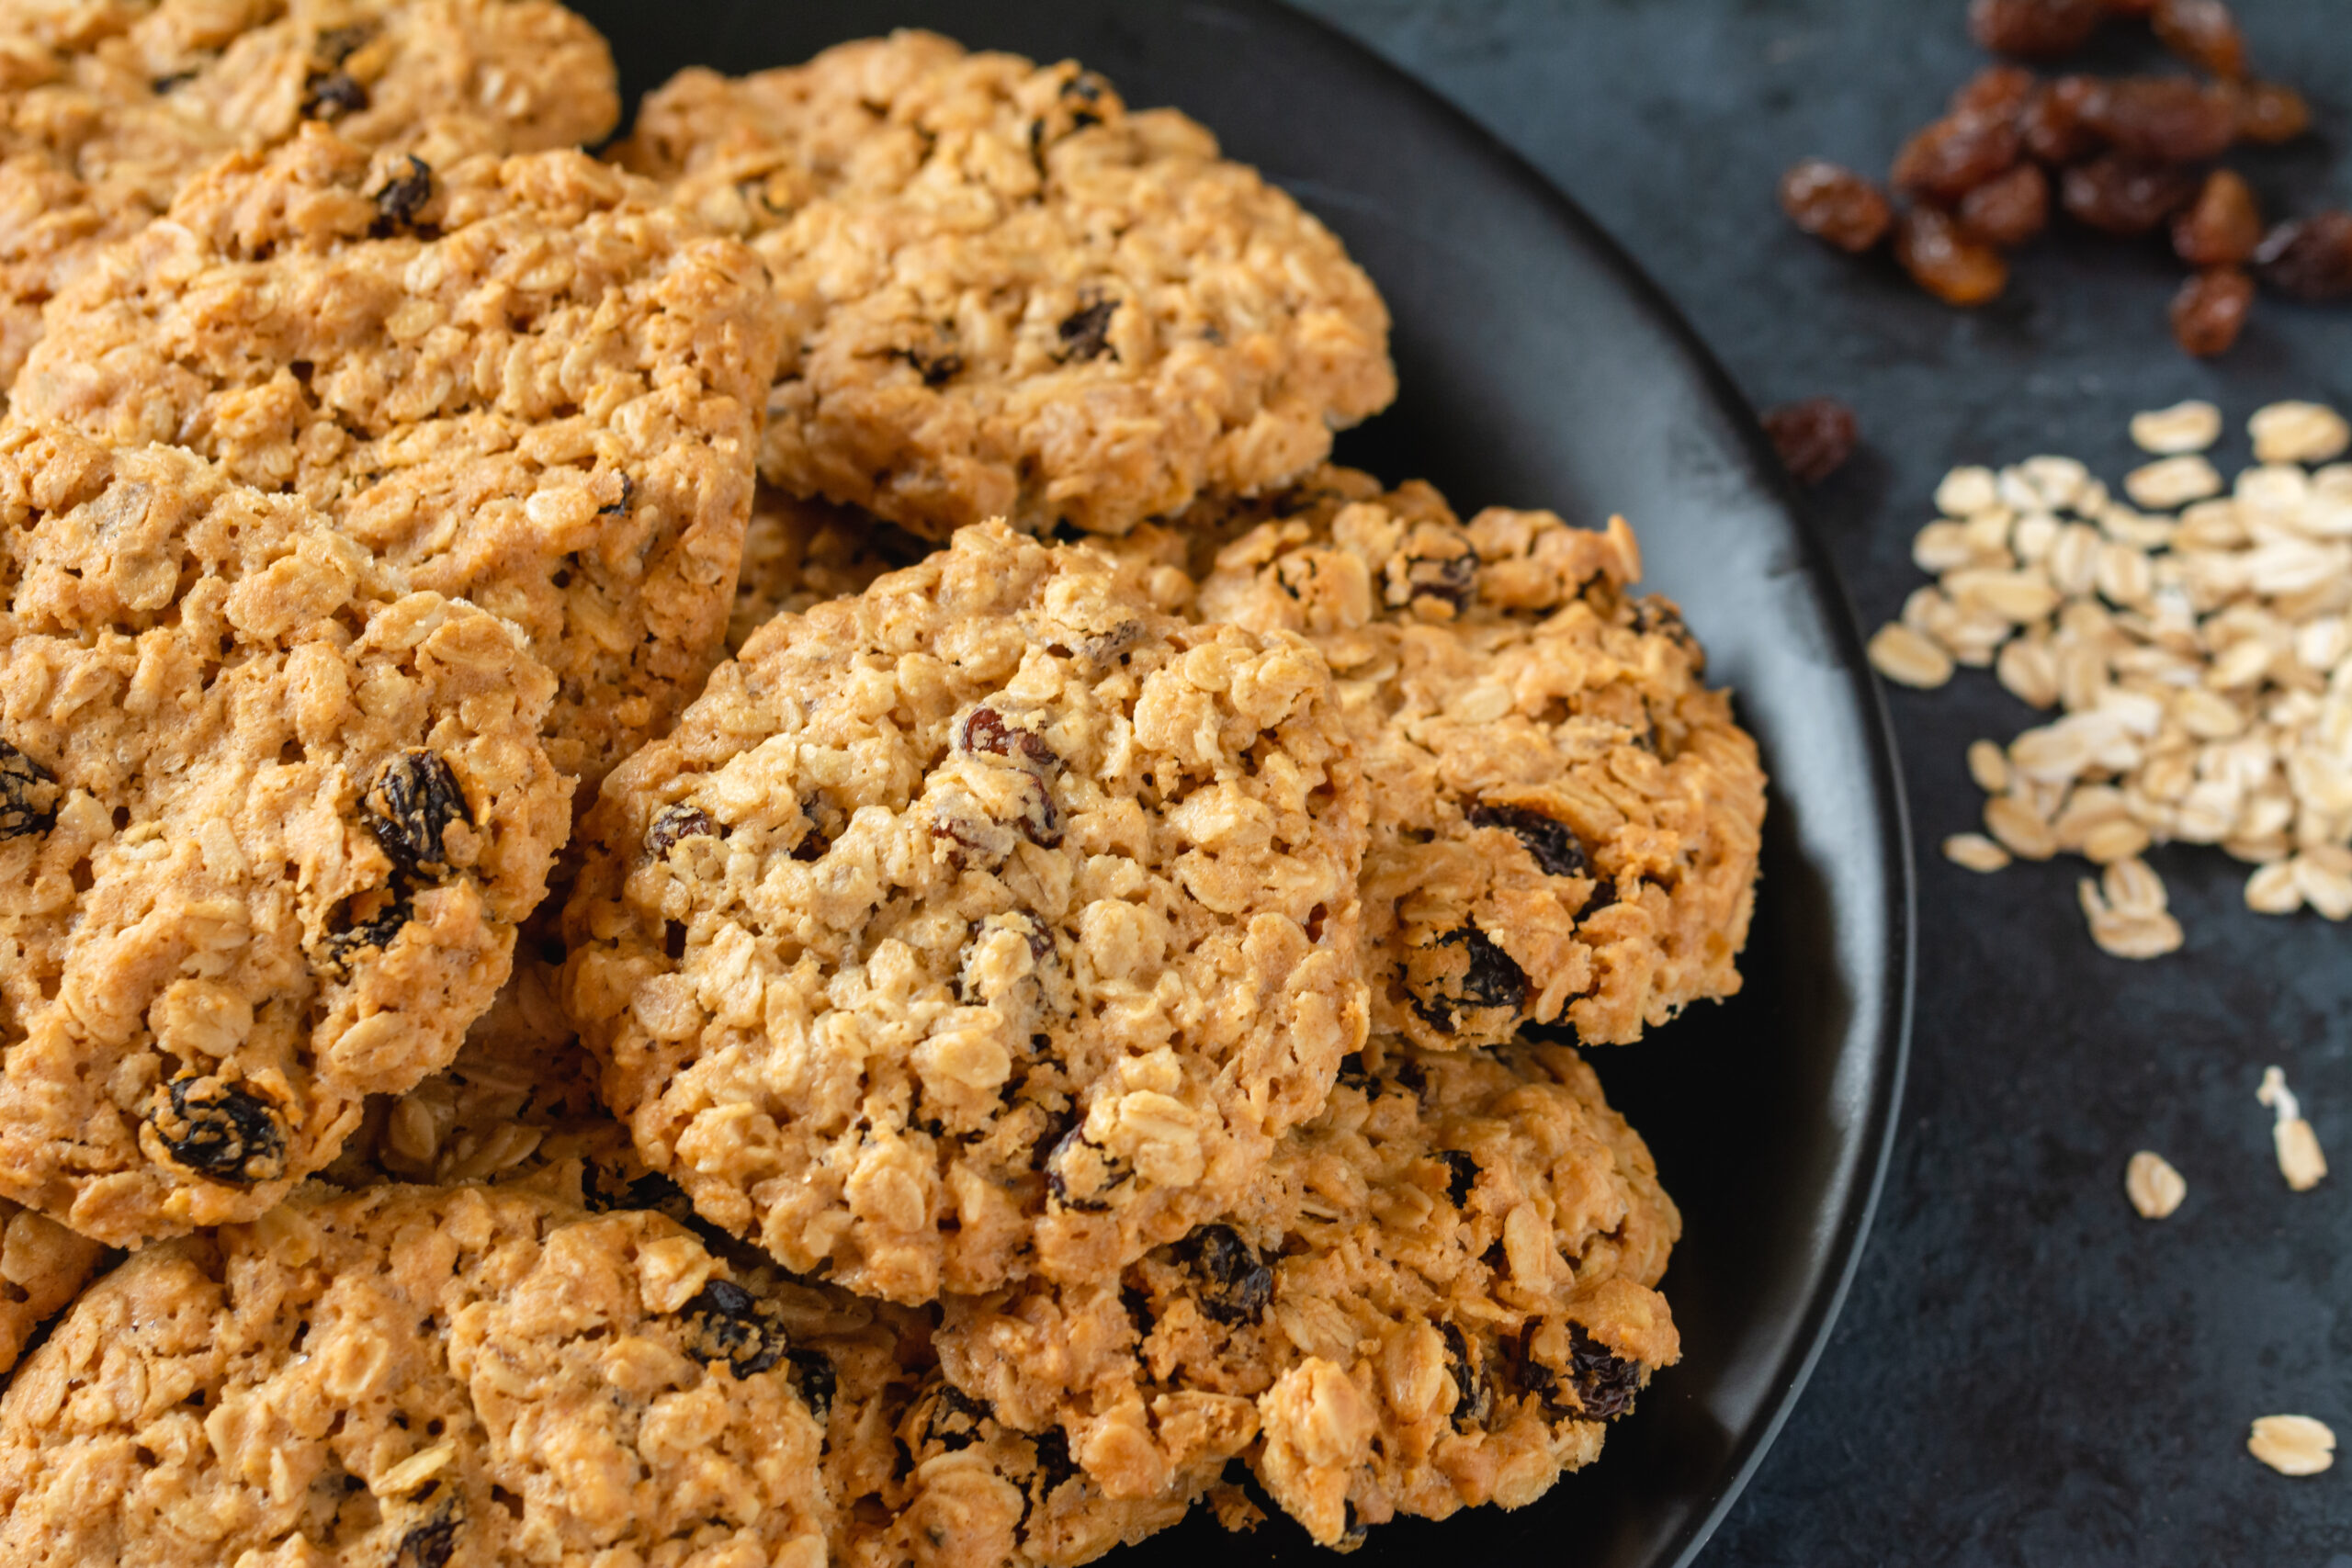 a pile of oatmeal raisin cookies on a dark background